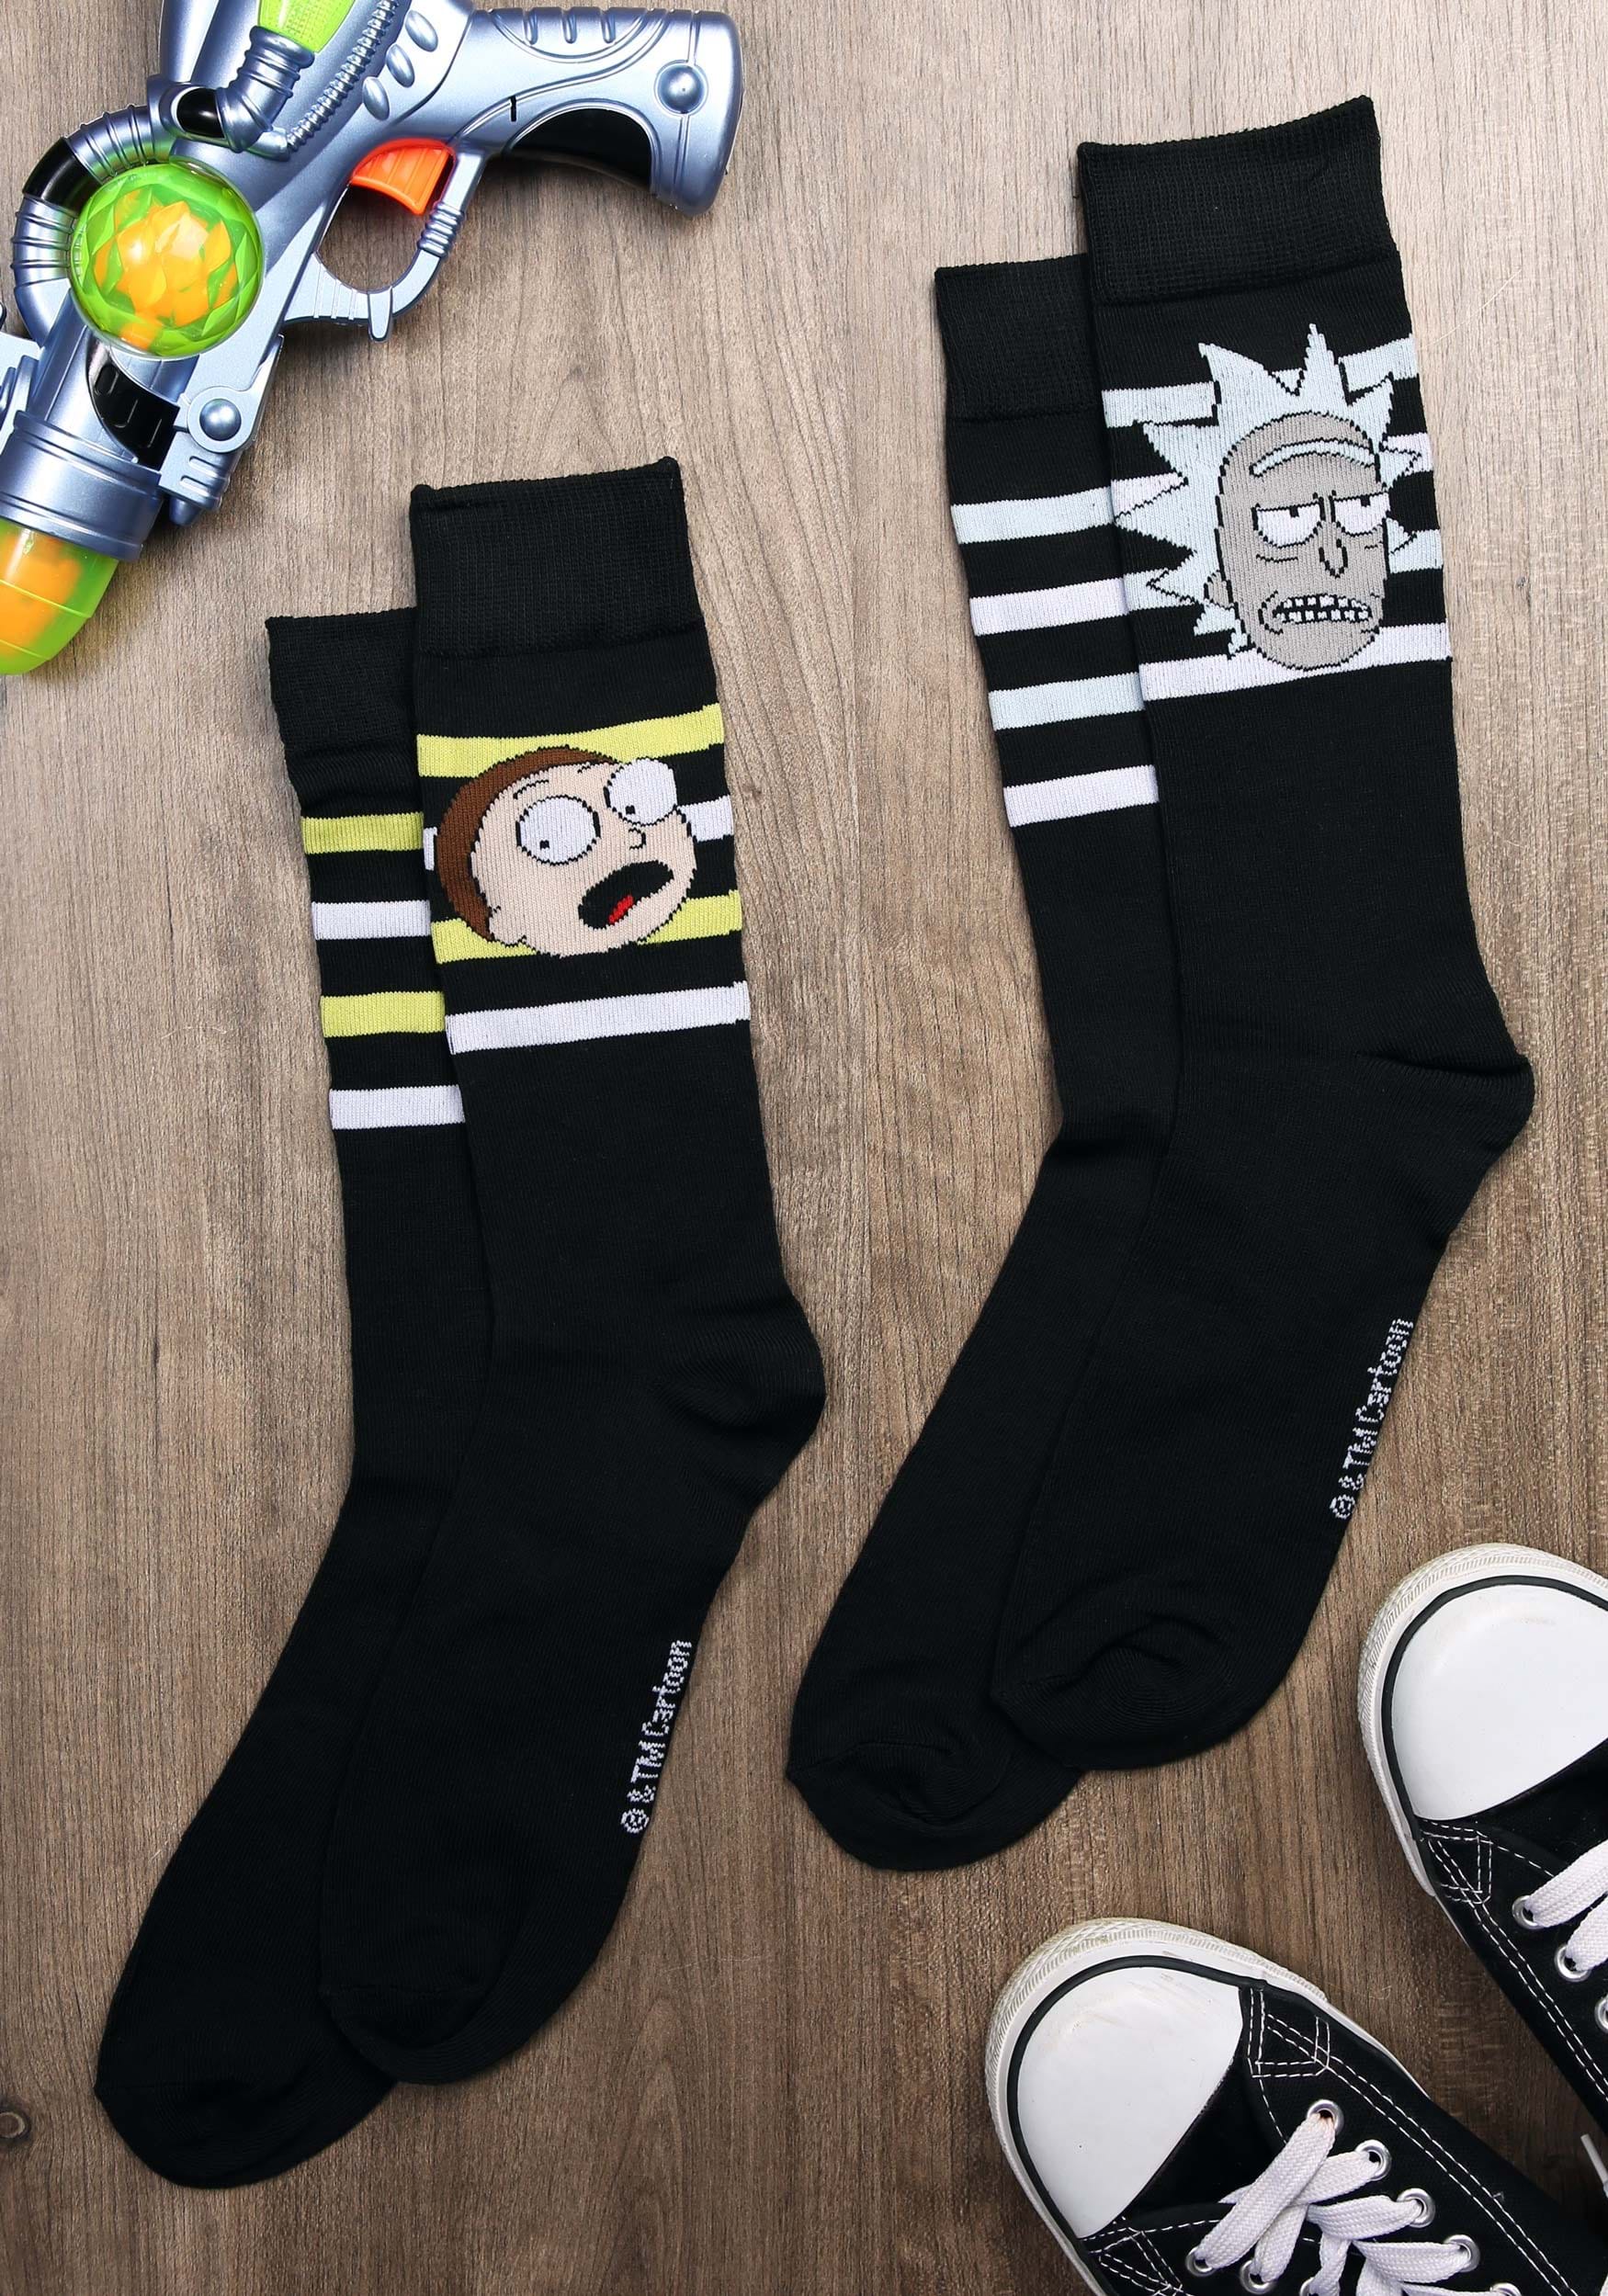 Funko Rick And Morty Socks 3 packs ONE SIZE